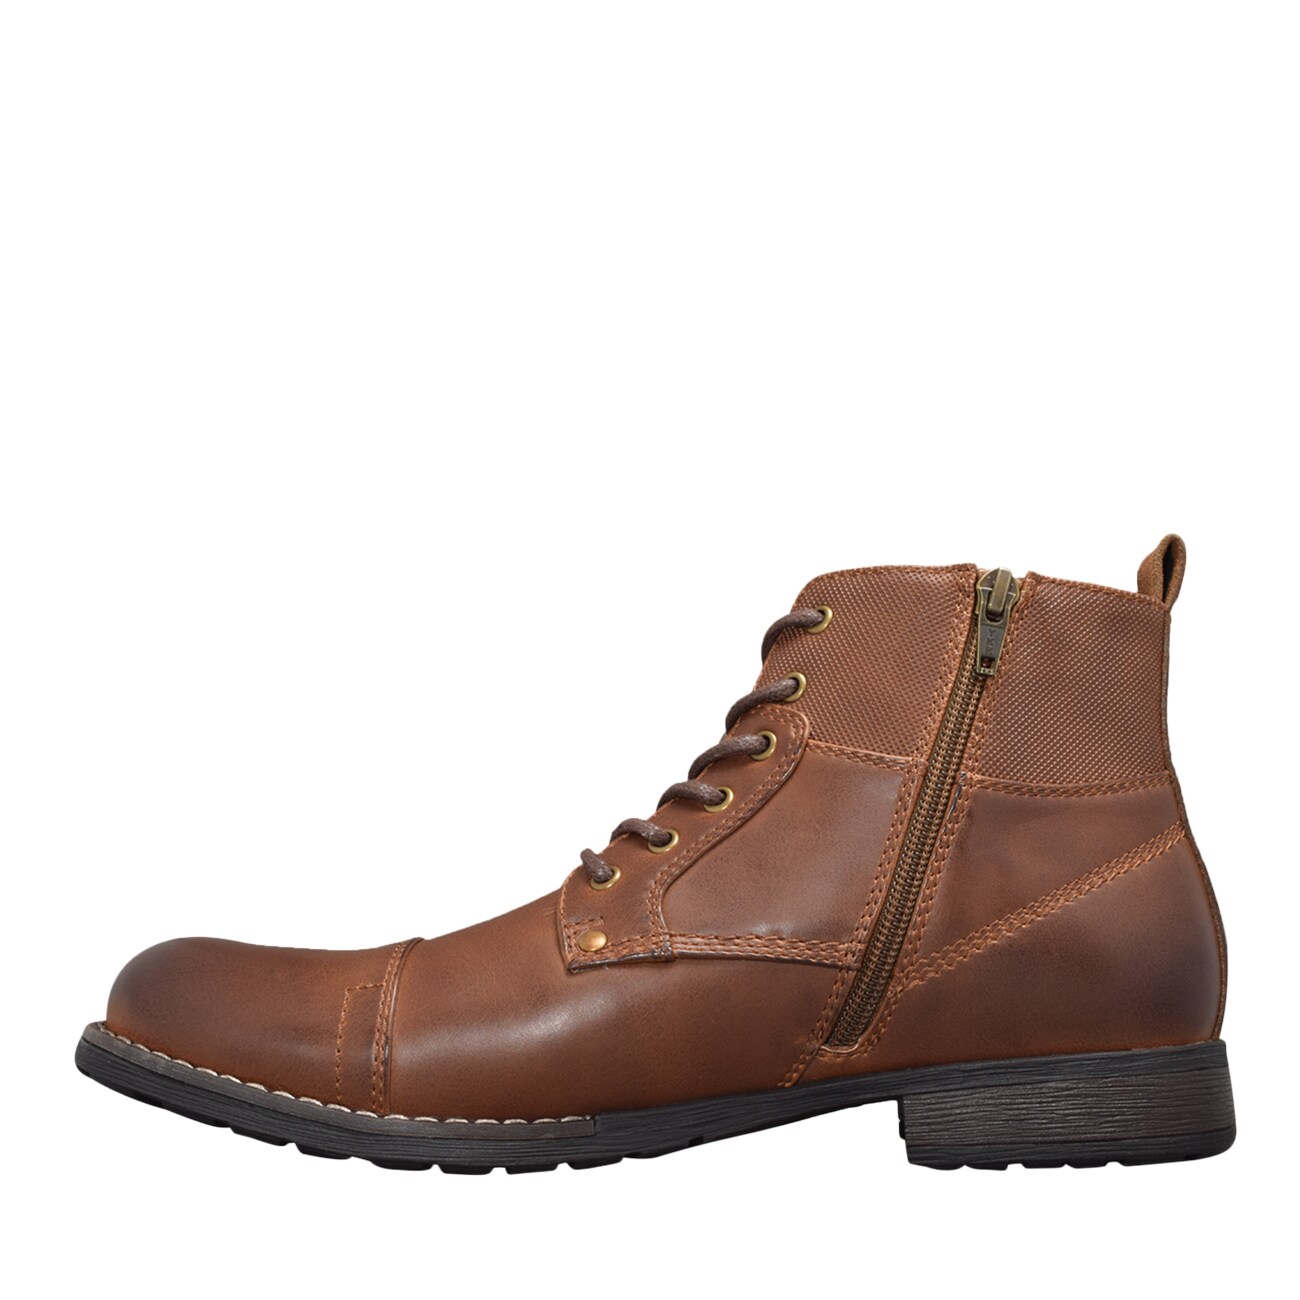 B52 By Bullboxer Lace-Up Boot | The Shoe Company